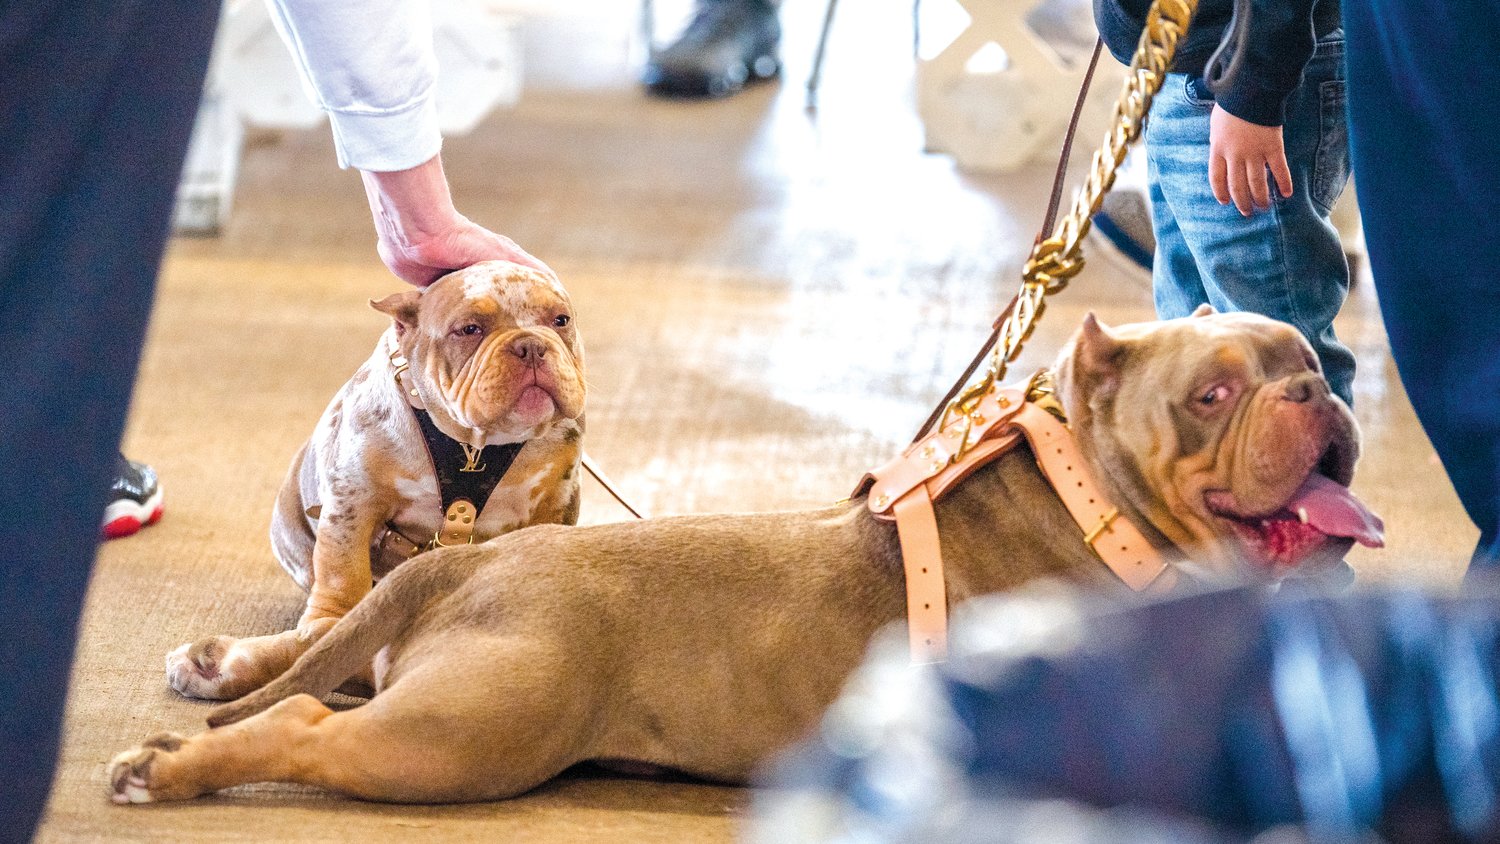 Bully breeds receive attention during a show at the Southwest Washington Fairgrounds Saturday morning.